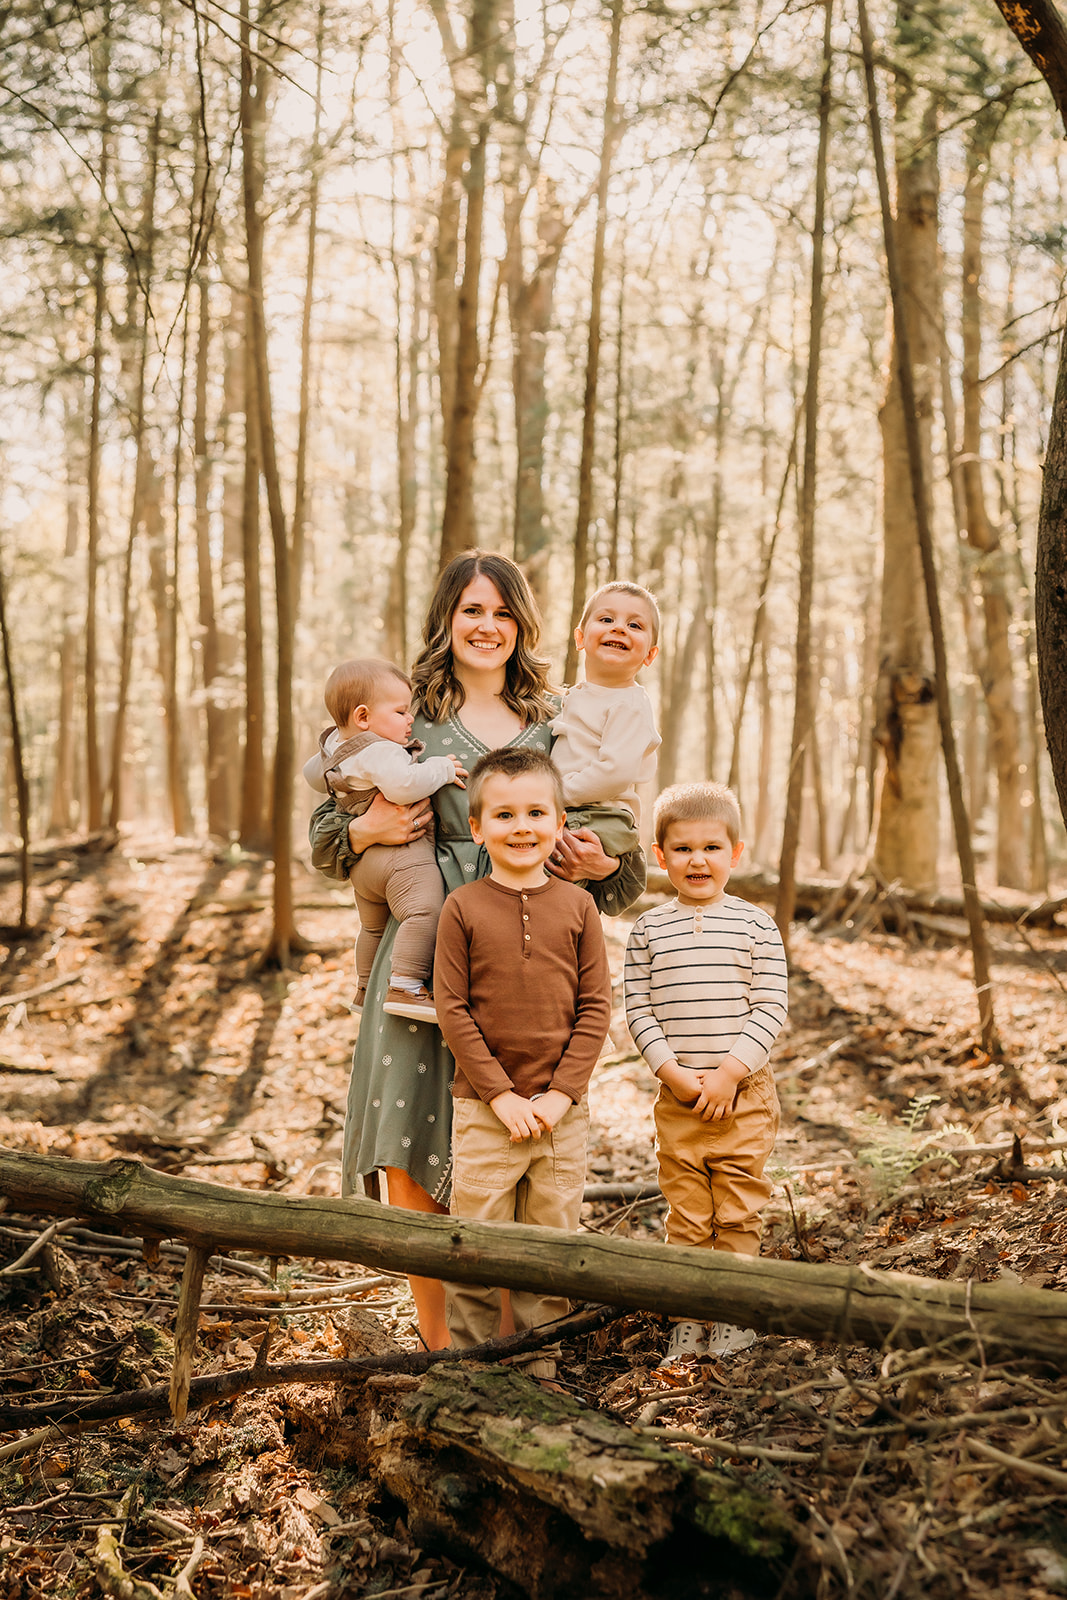 Joyful mother and children creating lasting memories in a forest photoshoot